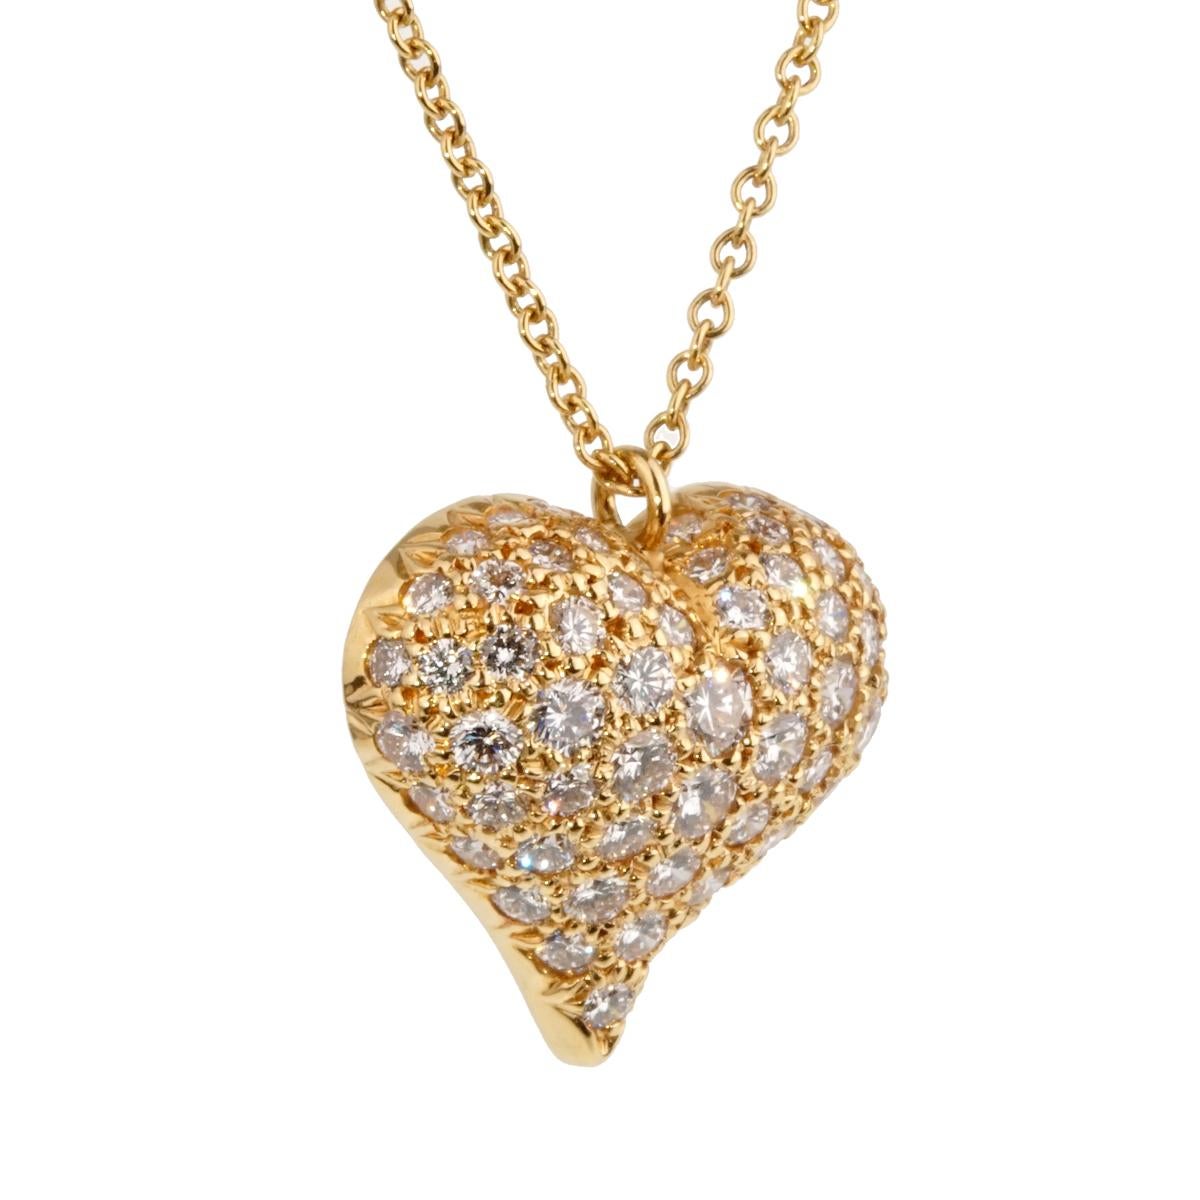 A fabulous Tiffany & Co diamond necklace featuring a puffed heart set with the finest Tiffany & Co round brilliant cut diamonds in 18k yellow gold.